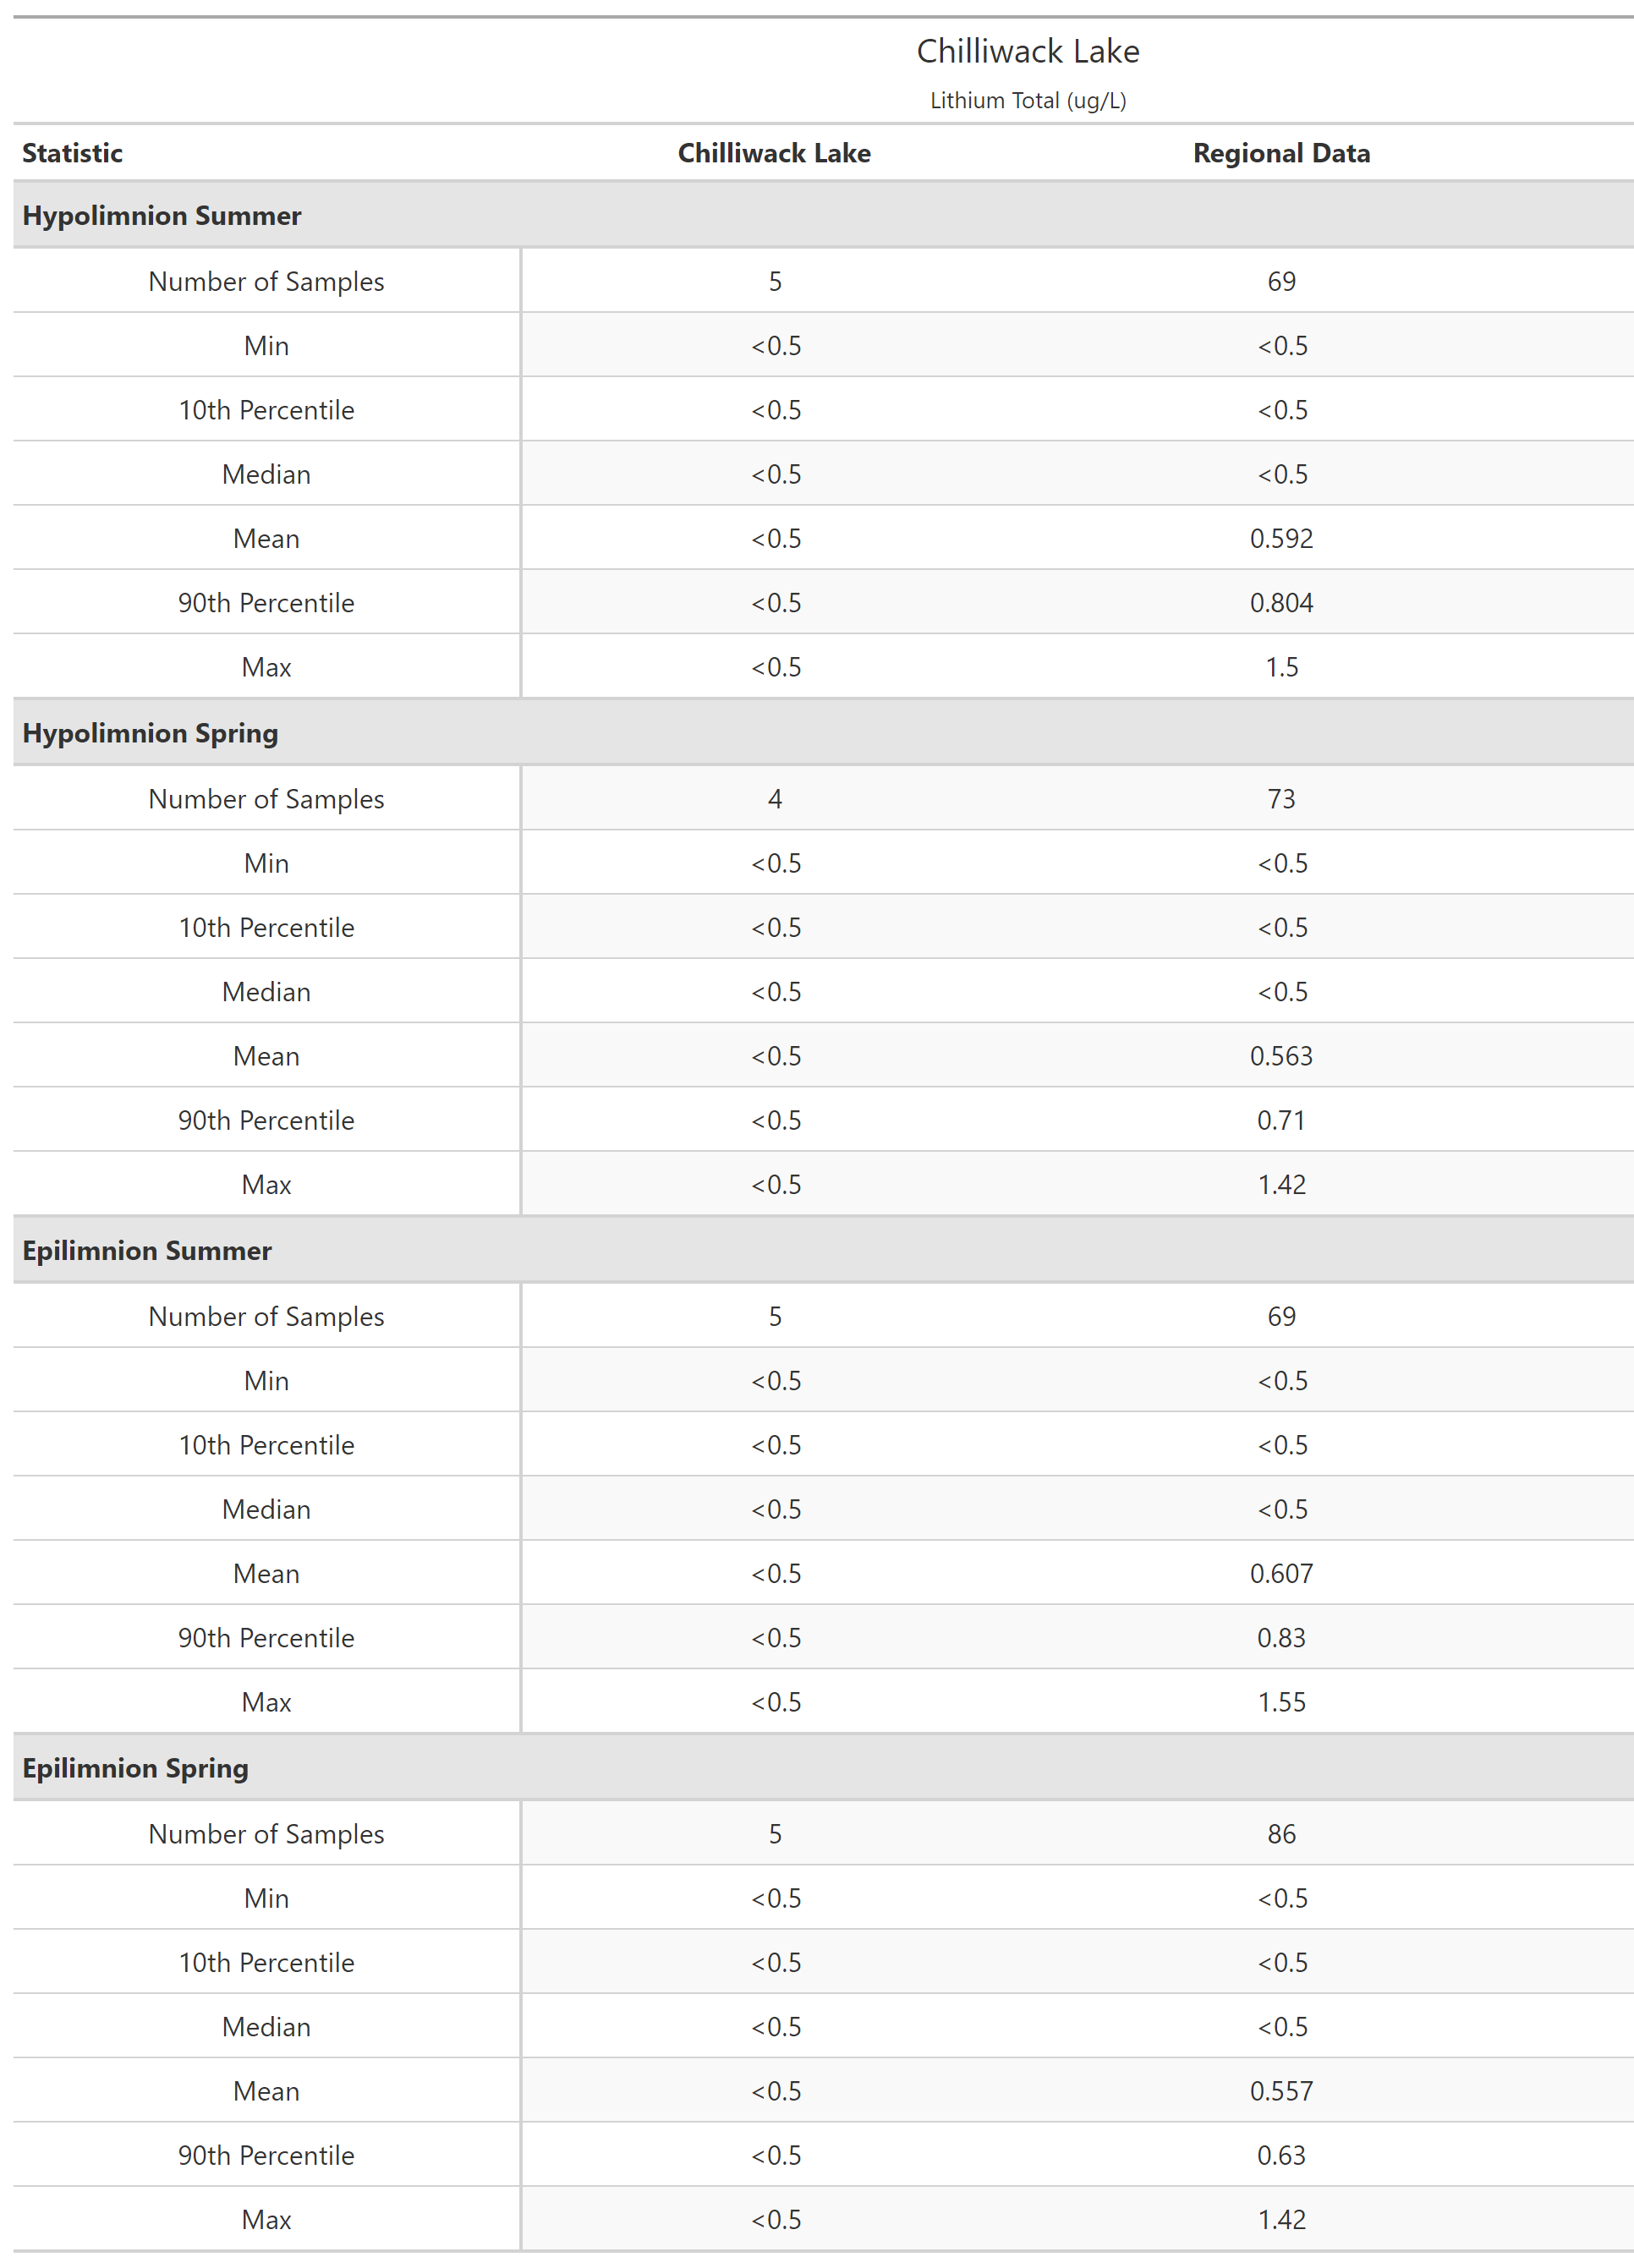 A table of summary statistics for Lithium Total with comparison to regional data